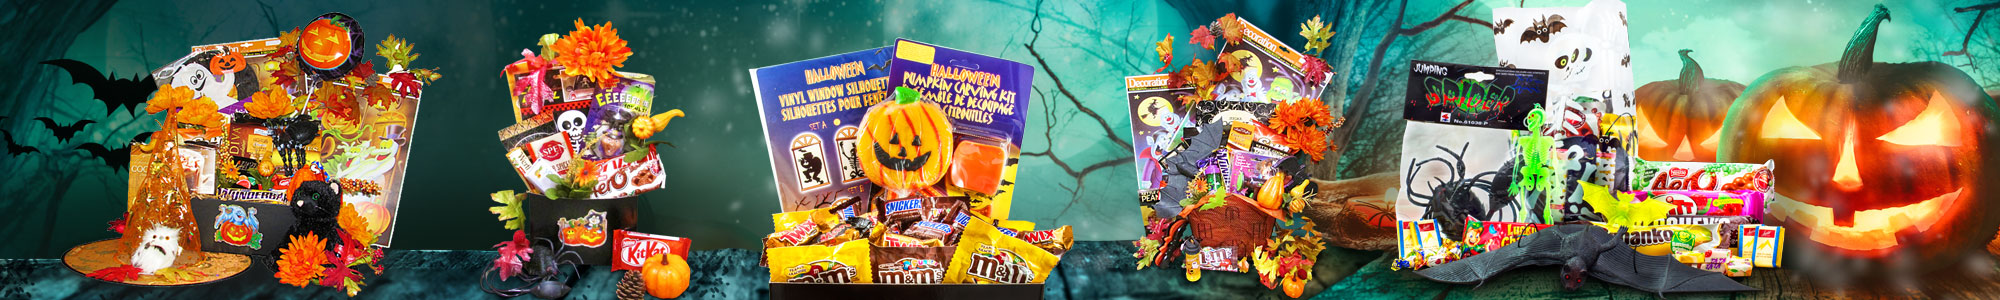 Halloween Gift Baskets by Gourmet Gift Basket Store